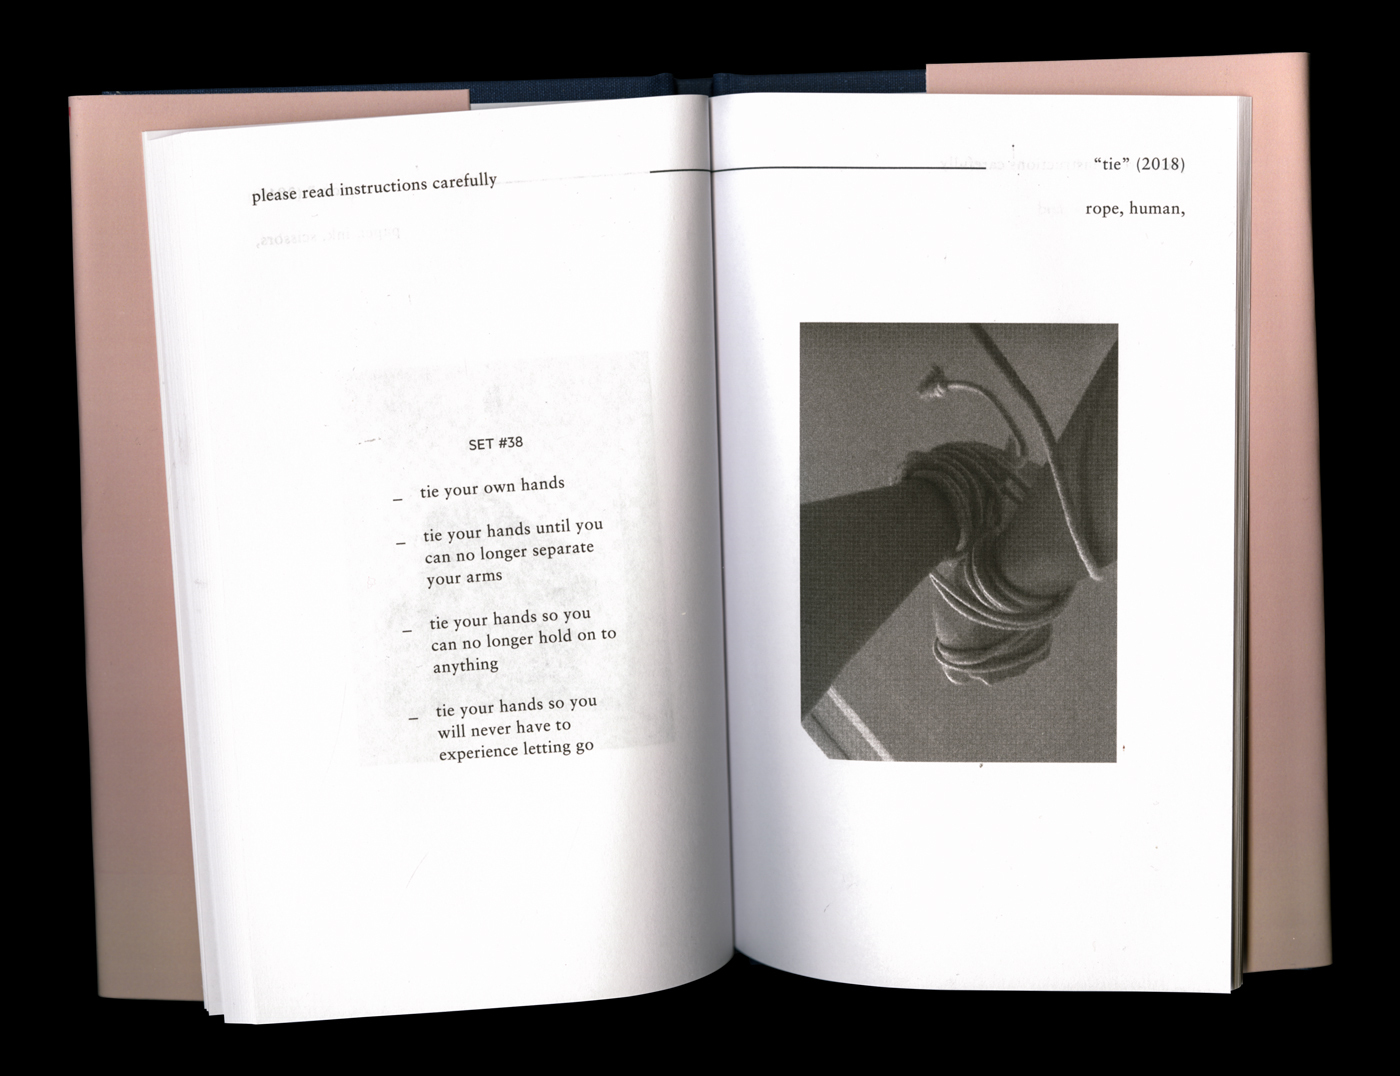 interior spread of the book "Seeds of a Grapefruit" with an image of two hands tied together